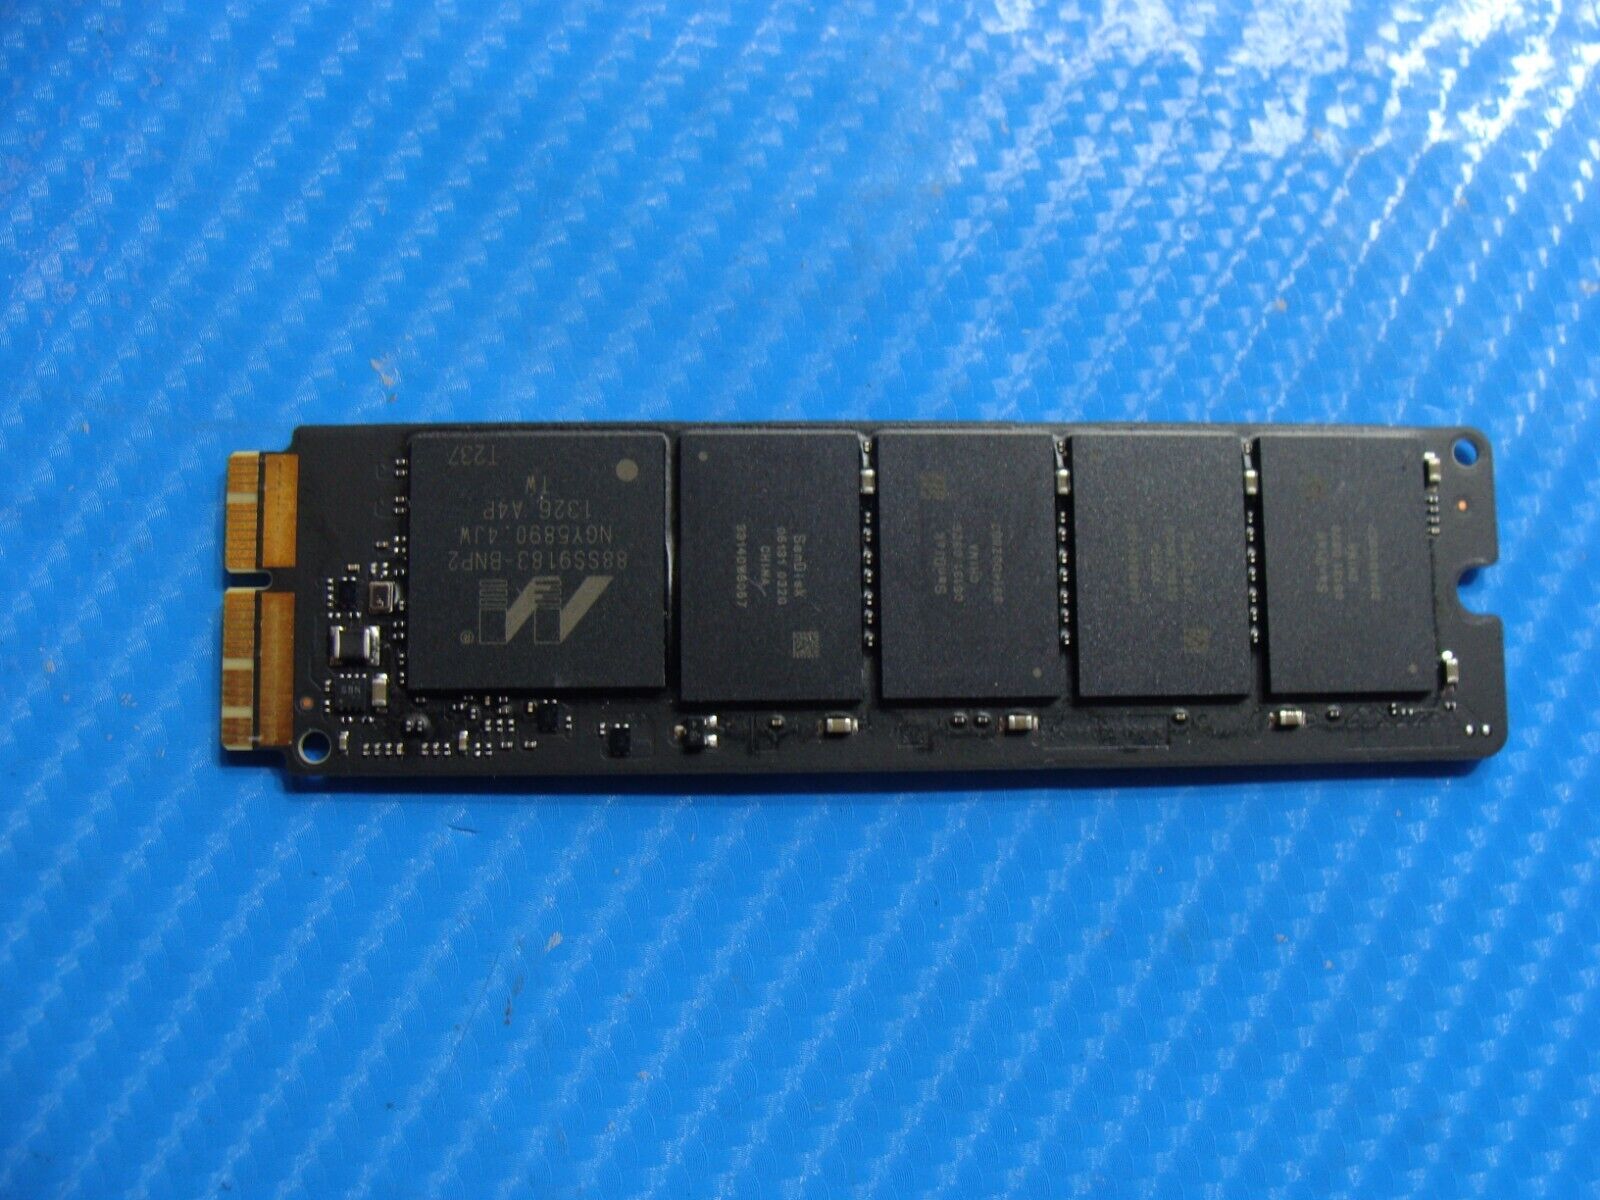 MacBook Air A1466 SanDisk 256GB Solid State Drive SD6PQ4M-256G-1021 655-1838C